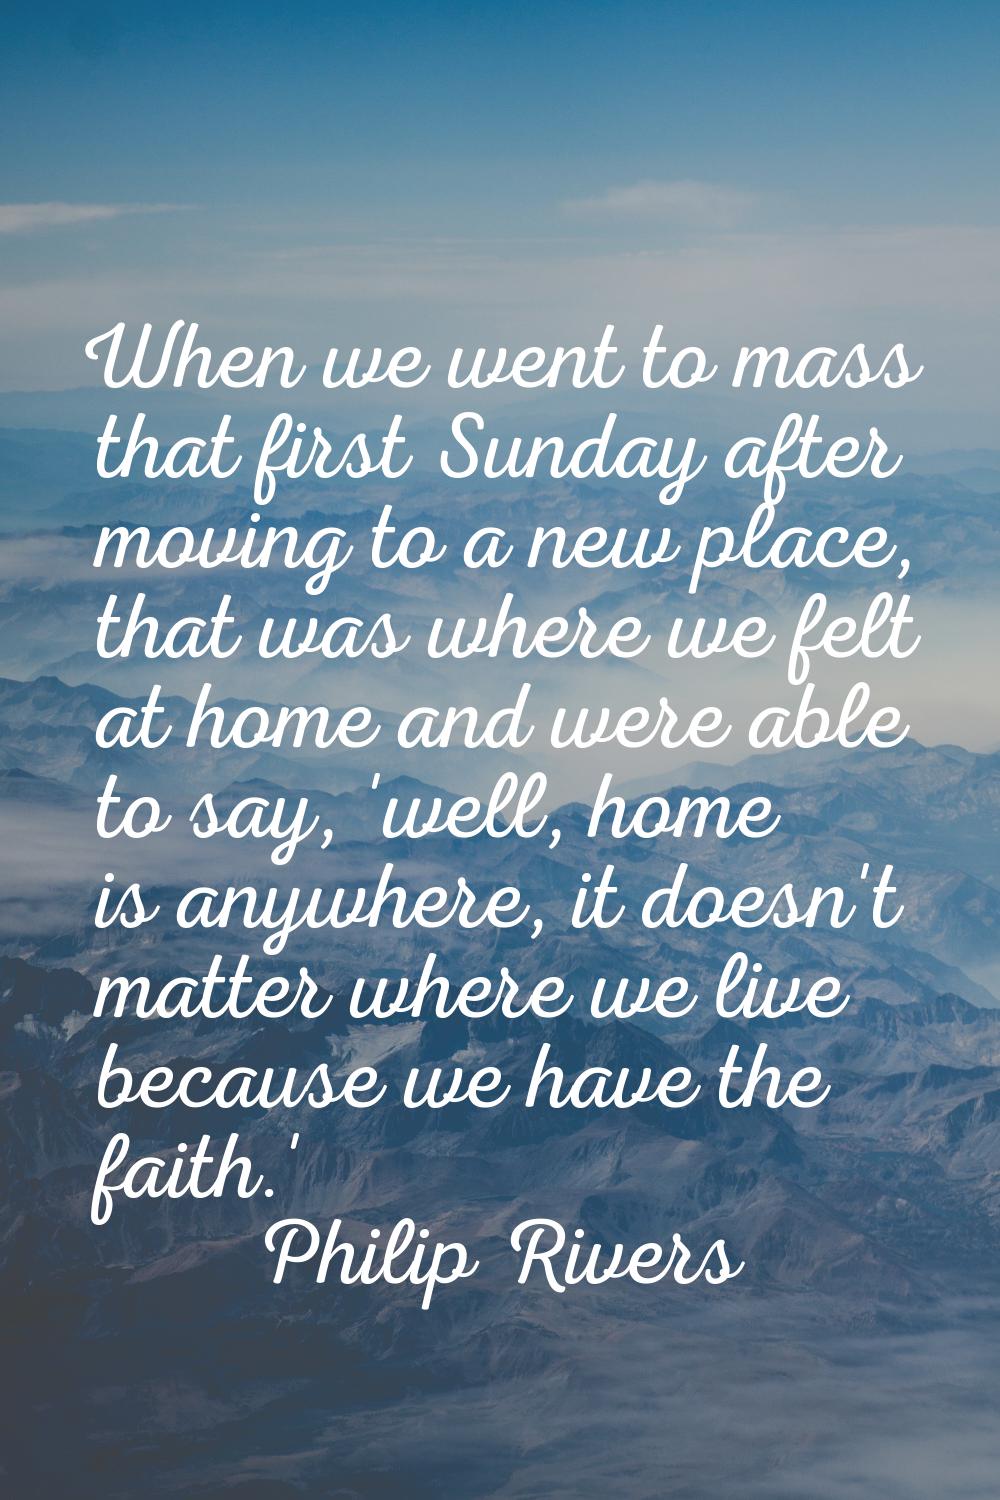 When we went to mass that first Sunday after moving to a new place, that was where we felt at home 